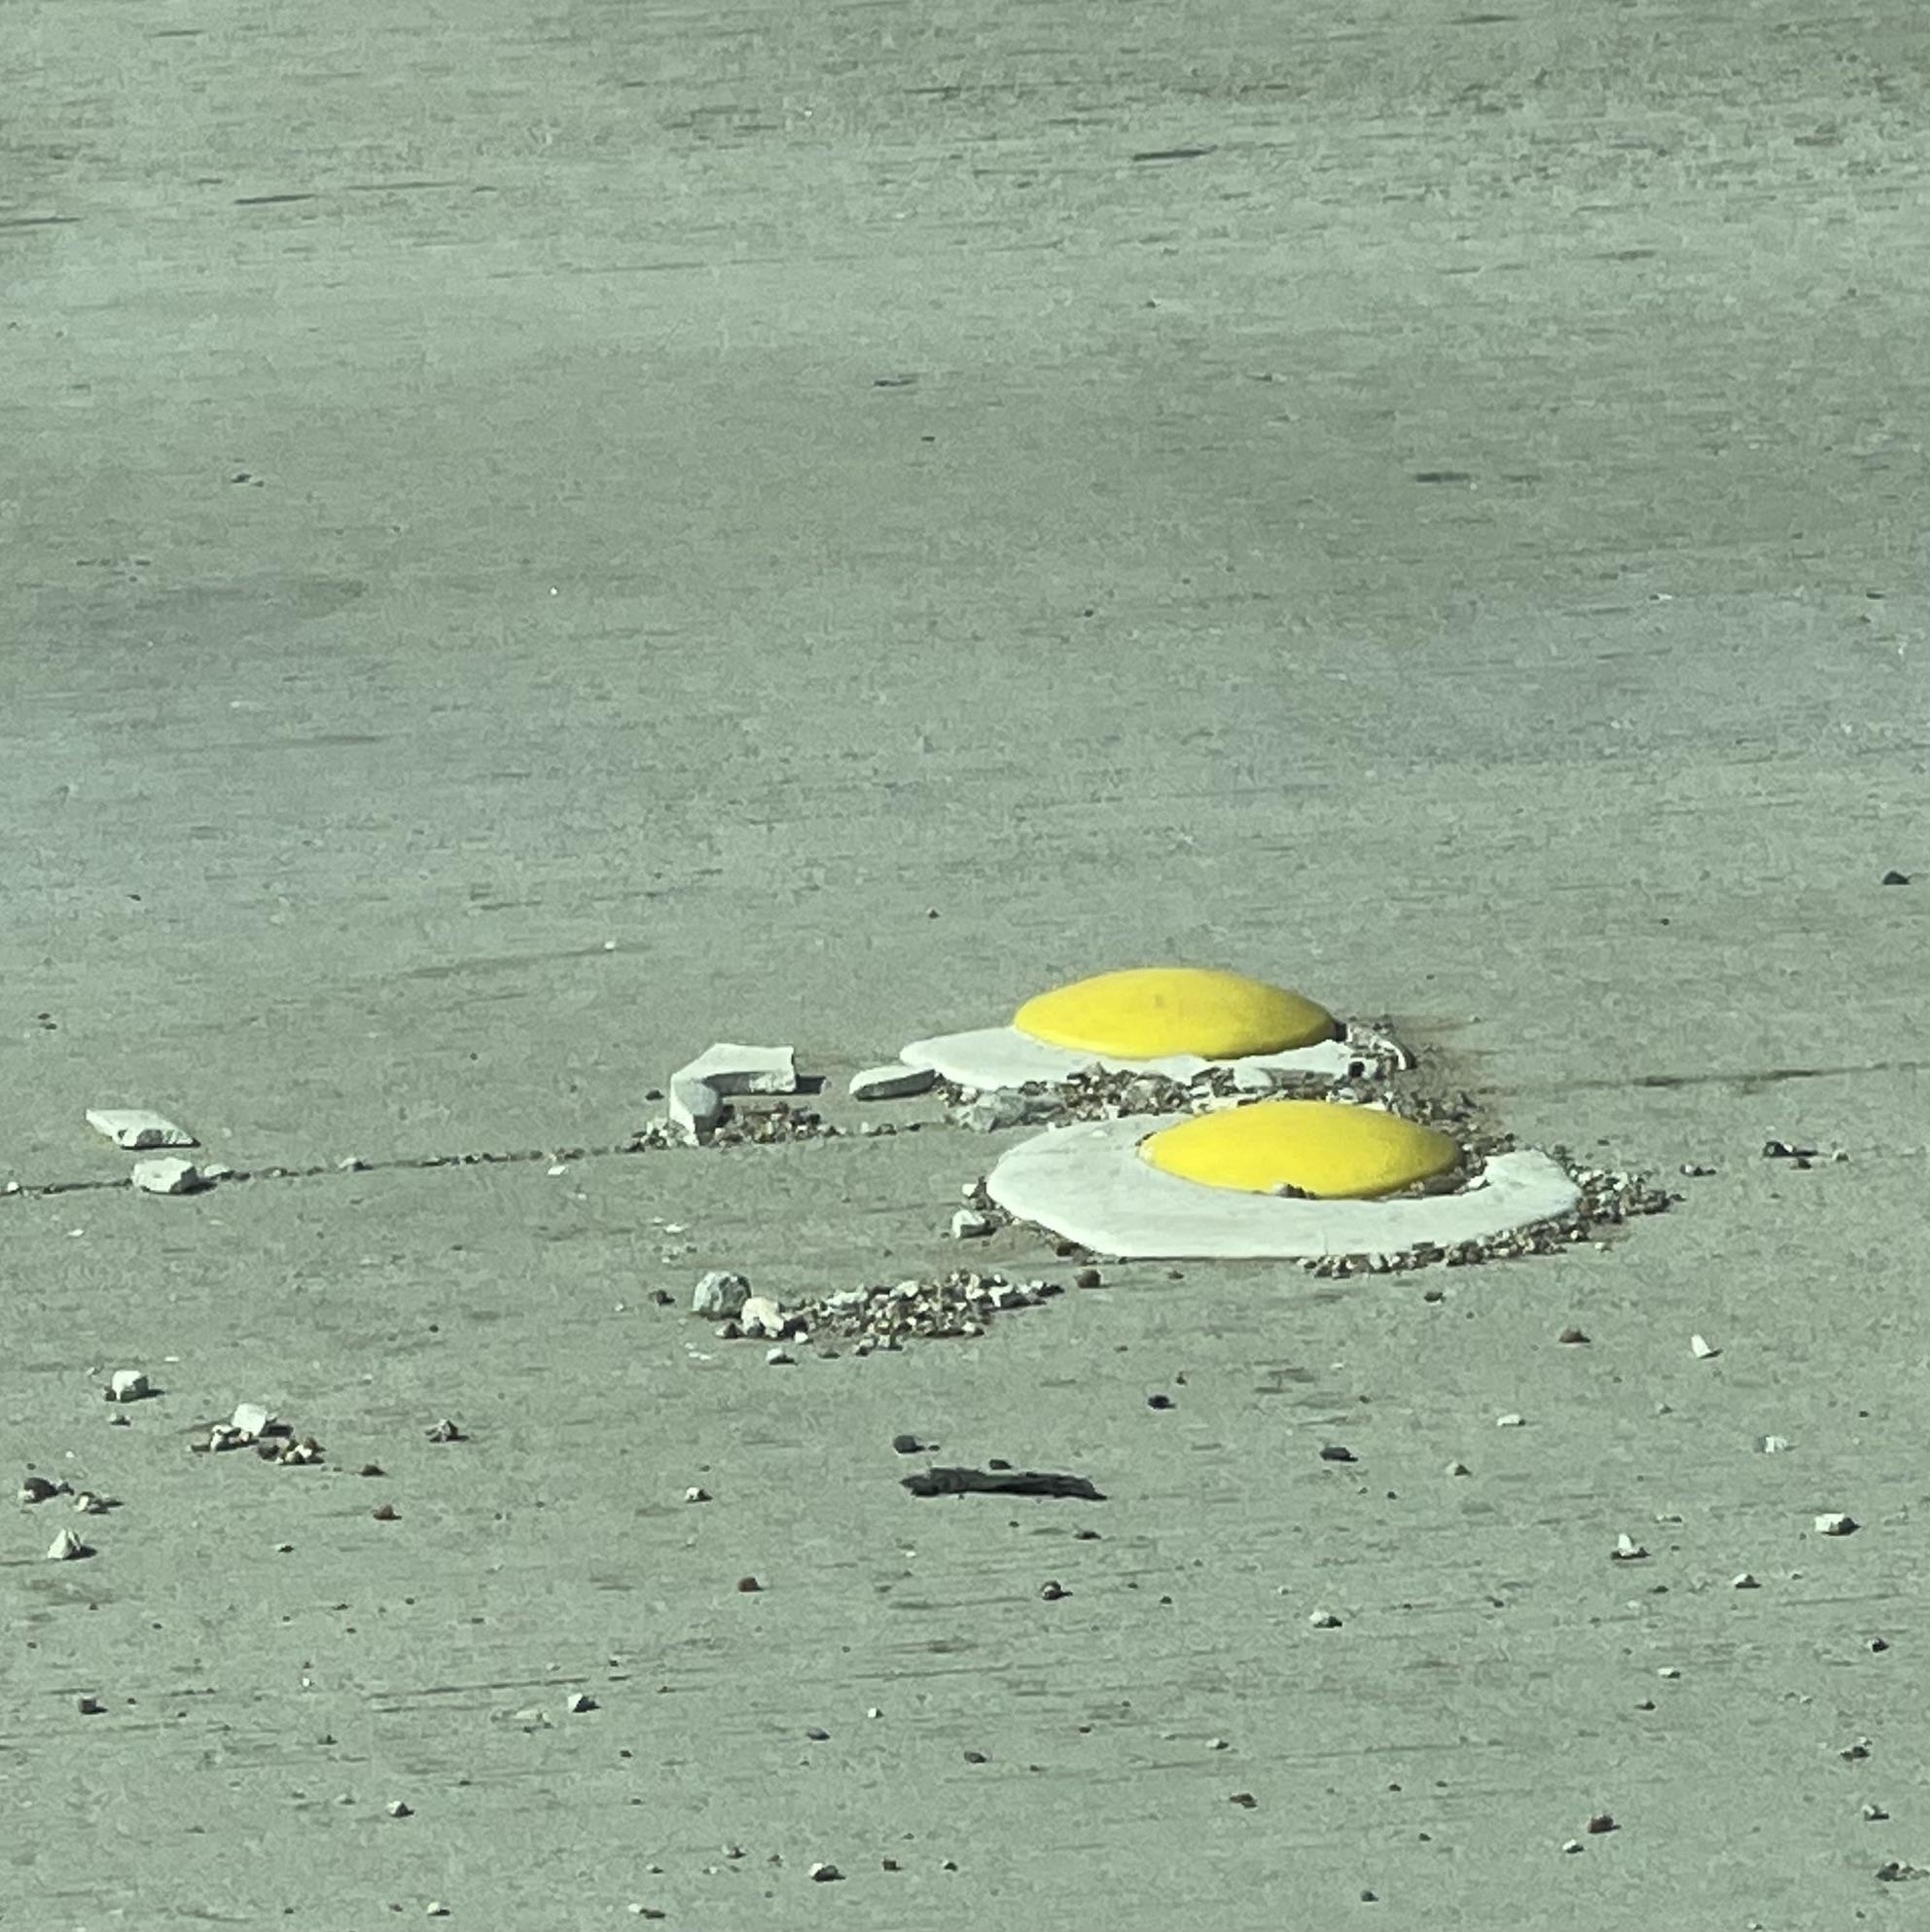 concrete lane dividers that look like sunny side up eggs